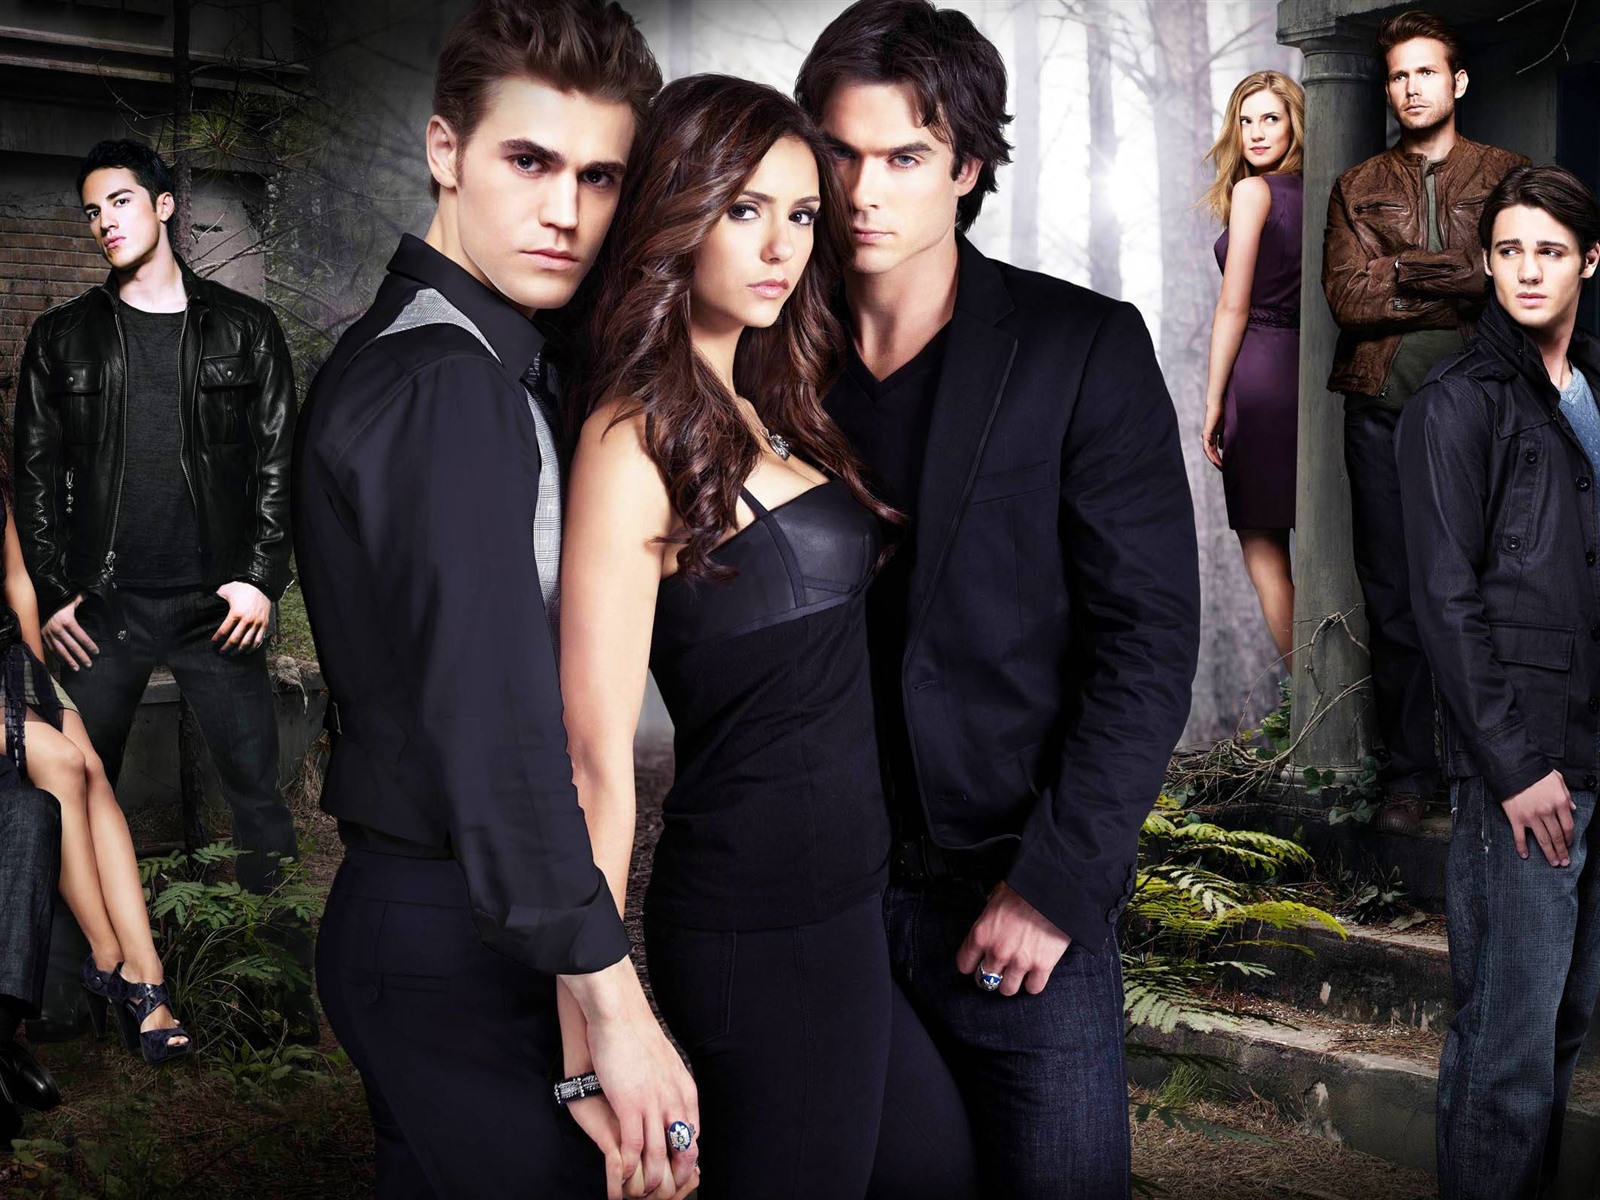 The Vampire Diaries HD Wallpapers #12 - 1600x1200